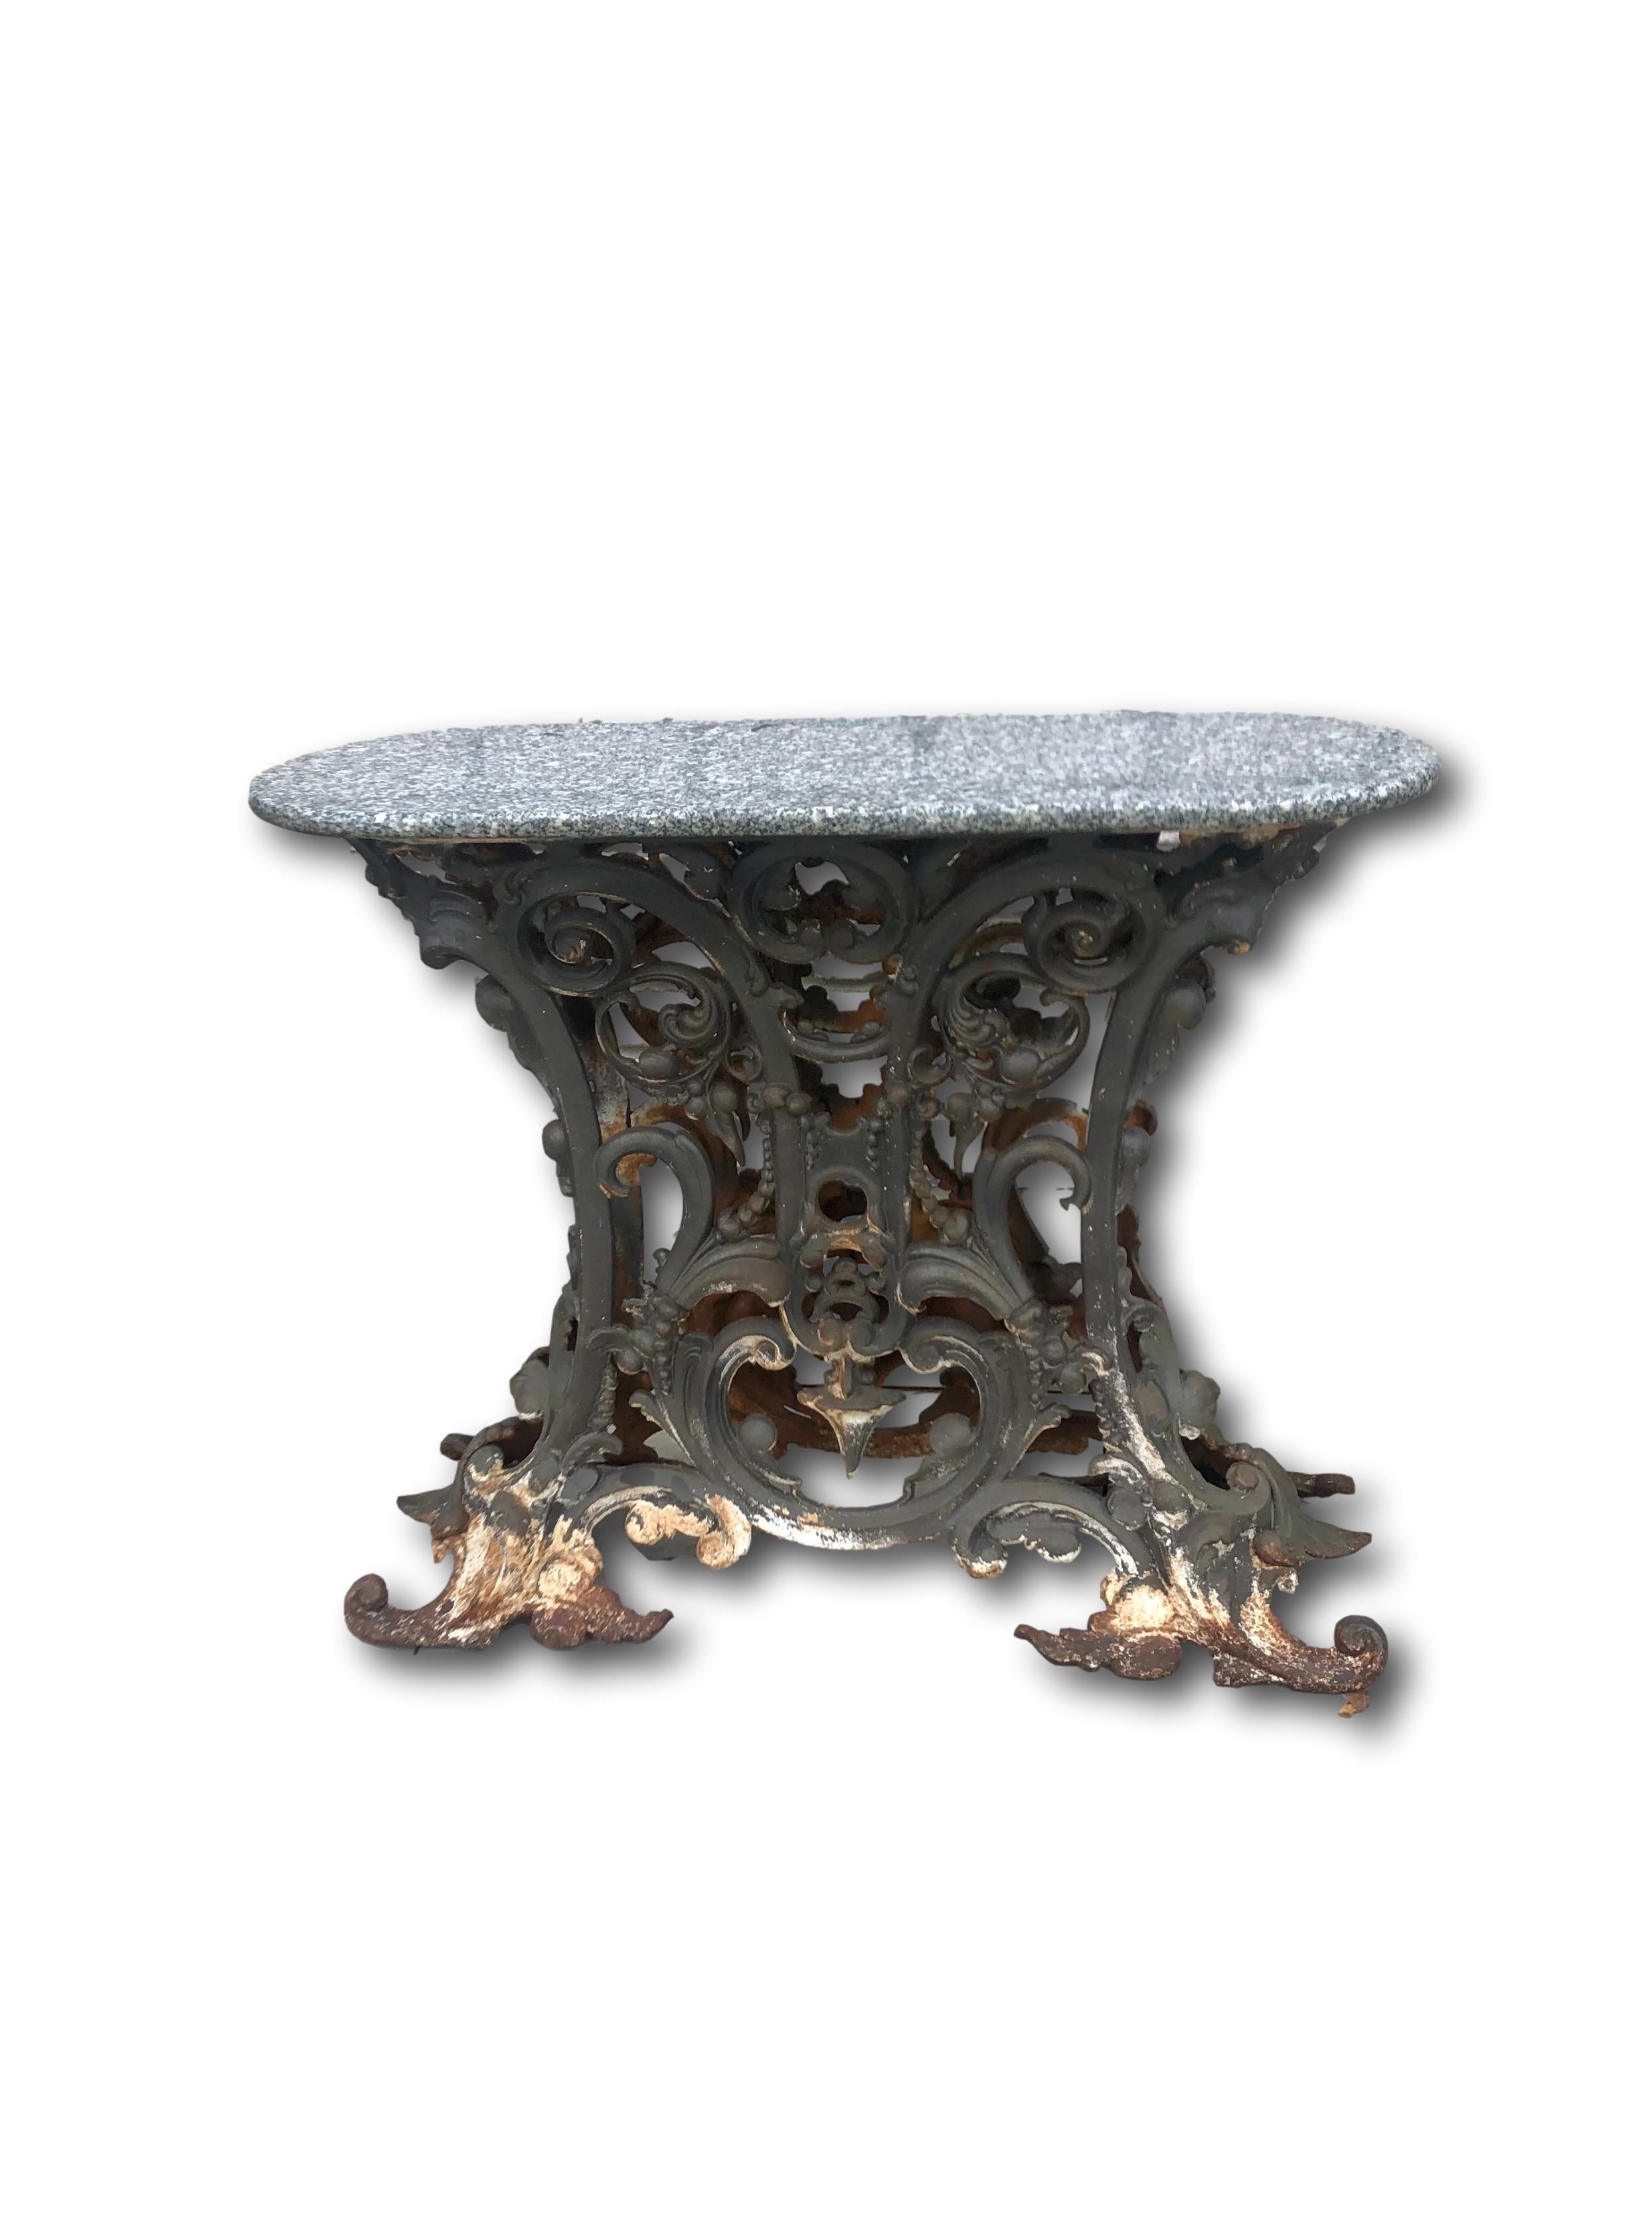 Pair of French console tables from the late 19th century with a wrought iron oval-shaped frame and removable grey granite surface. The two-sided heavy wrought iron frame features C-scrolls, fruit and acanthus leaves decoration. The console tables